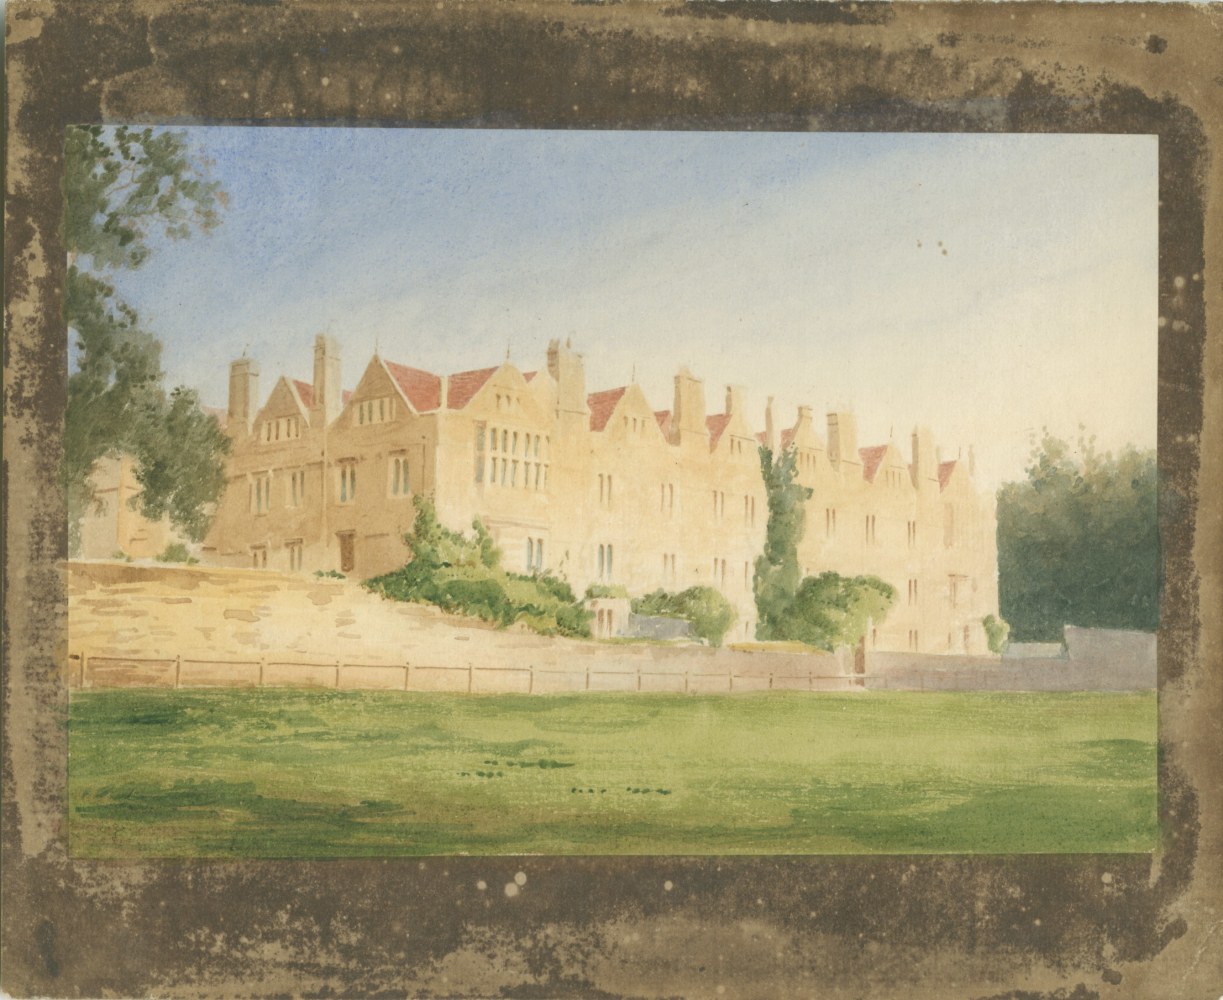 William Henry Fox TALBOT (English, 1800-1877) Merton College from the fields, Oxford, circa 1843 Hand colored (possibly by André Mansion) salt print, from a calotype negative 13.6 x 20.2 cm on 18.7 x 22.7 cm paper Inscribed &quot;M' and &quot;X&quot; and [illegible] in pencil on verso